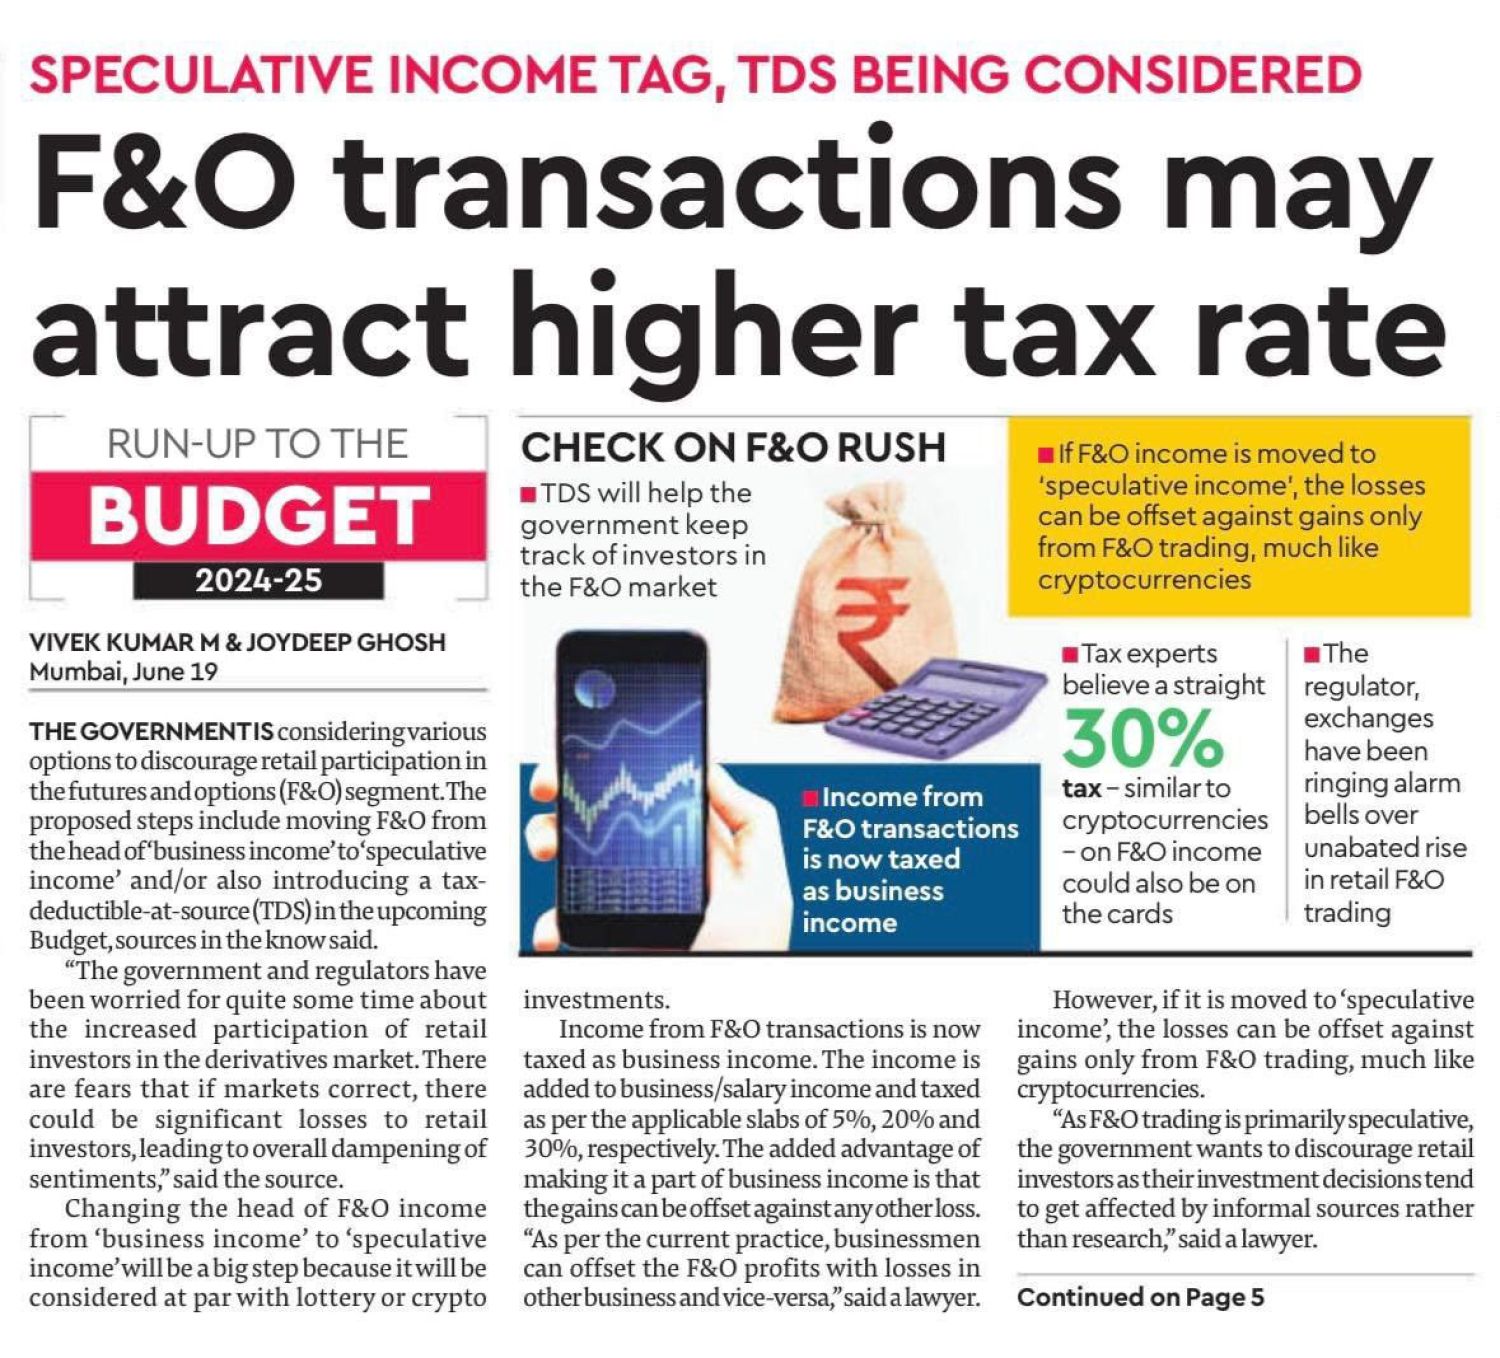  Futures and Options transactions may attract higher tax rate